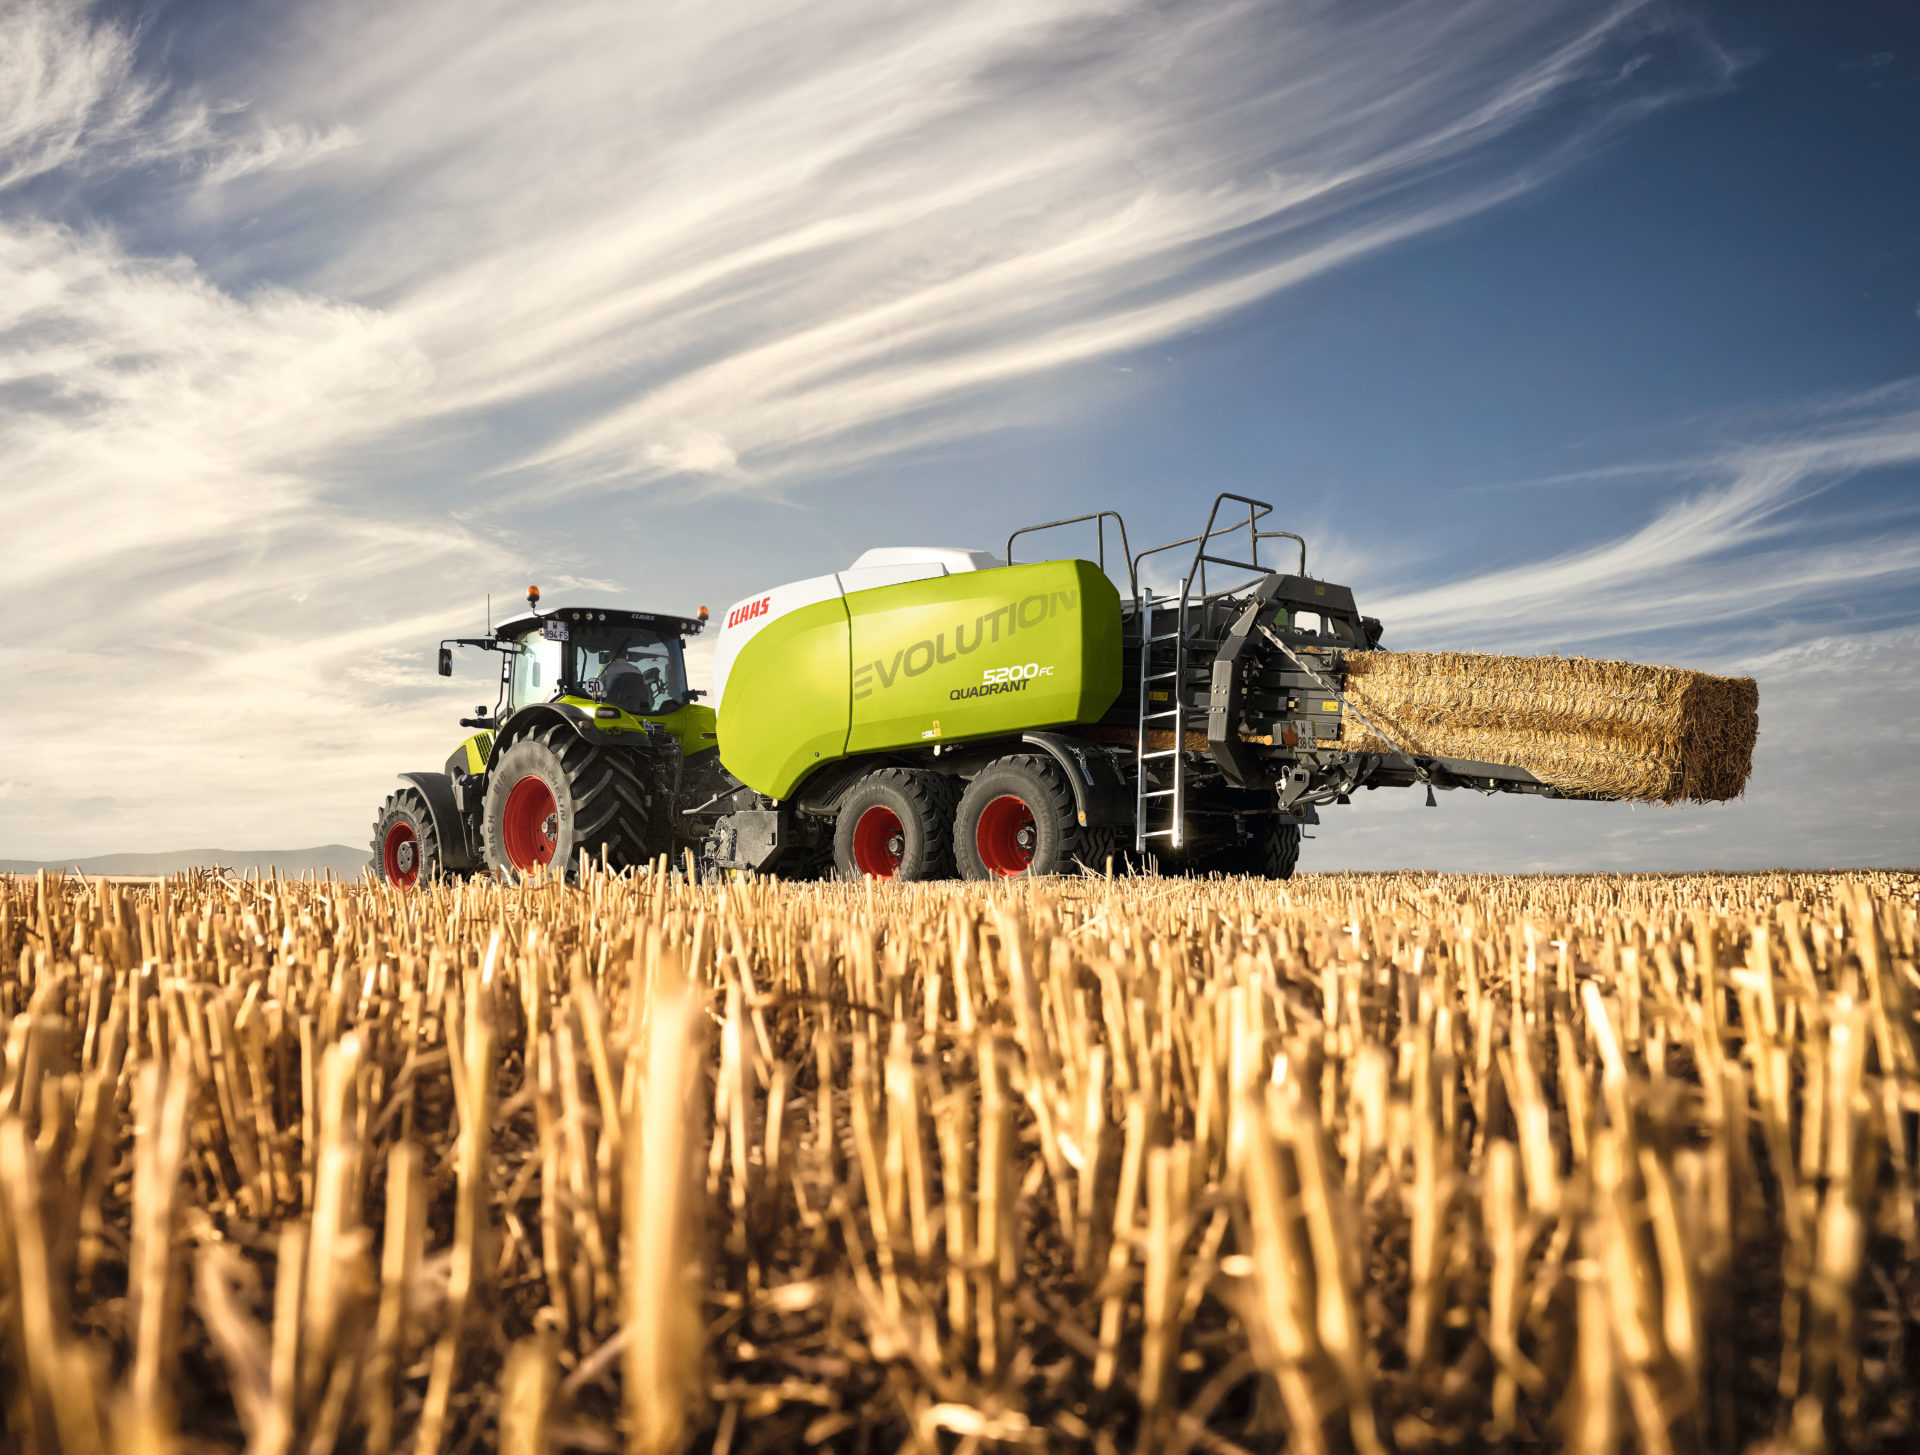 Big leap forward for CLAAS square balers